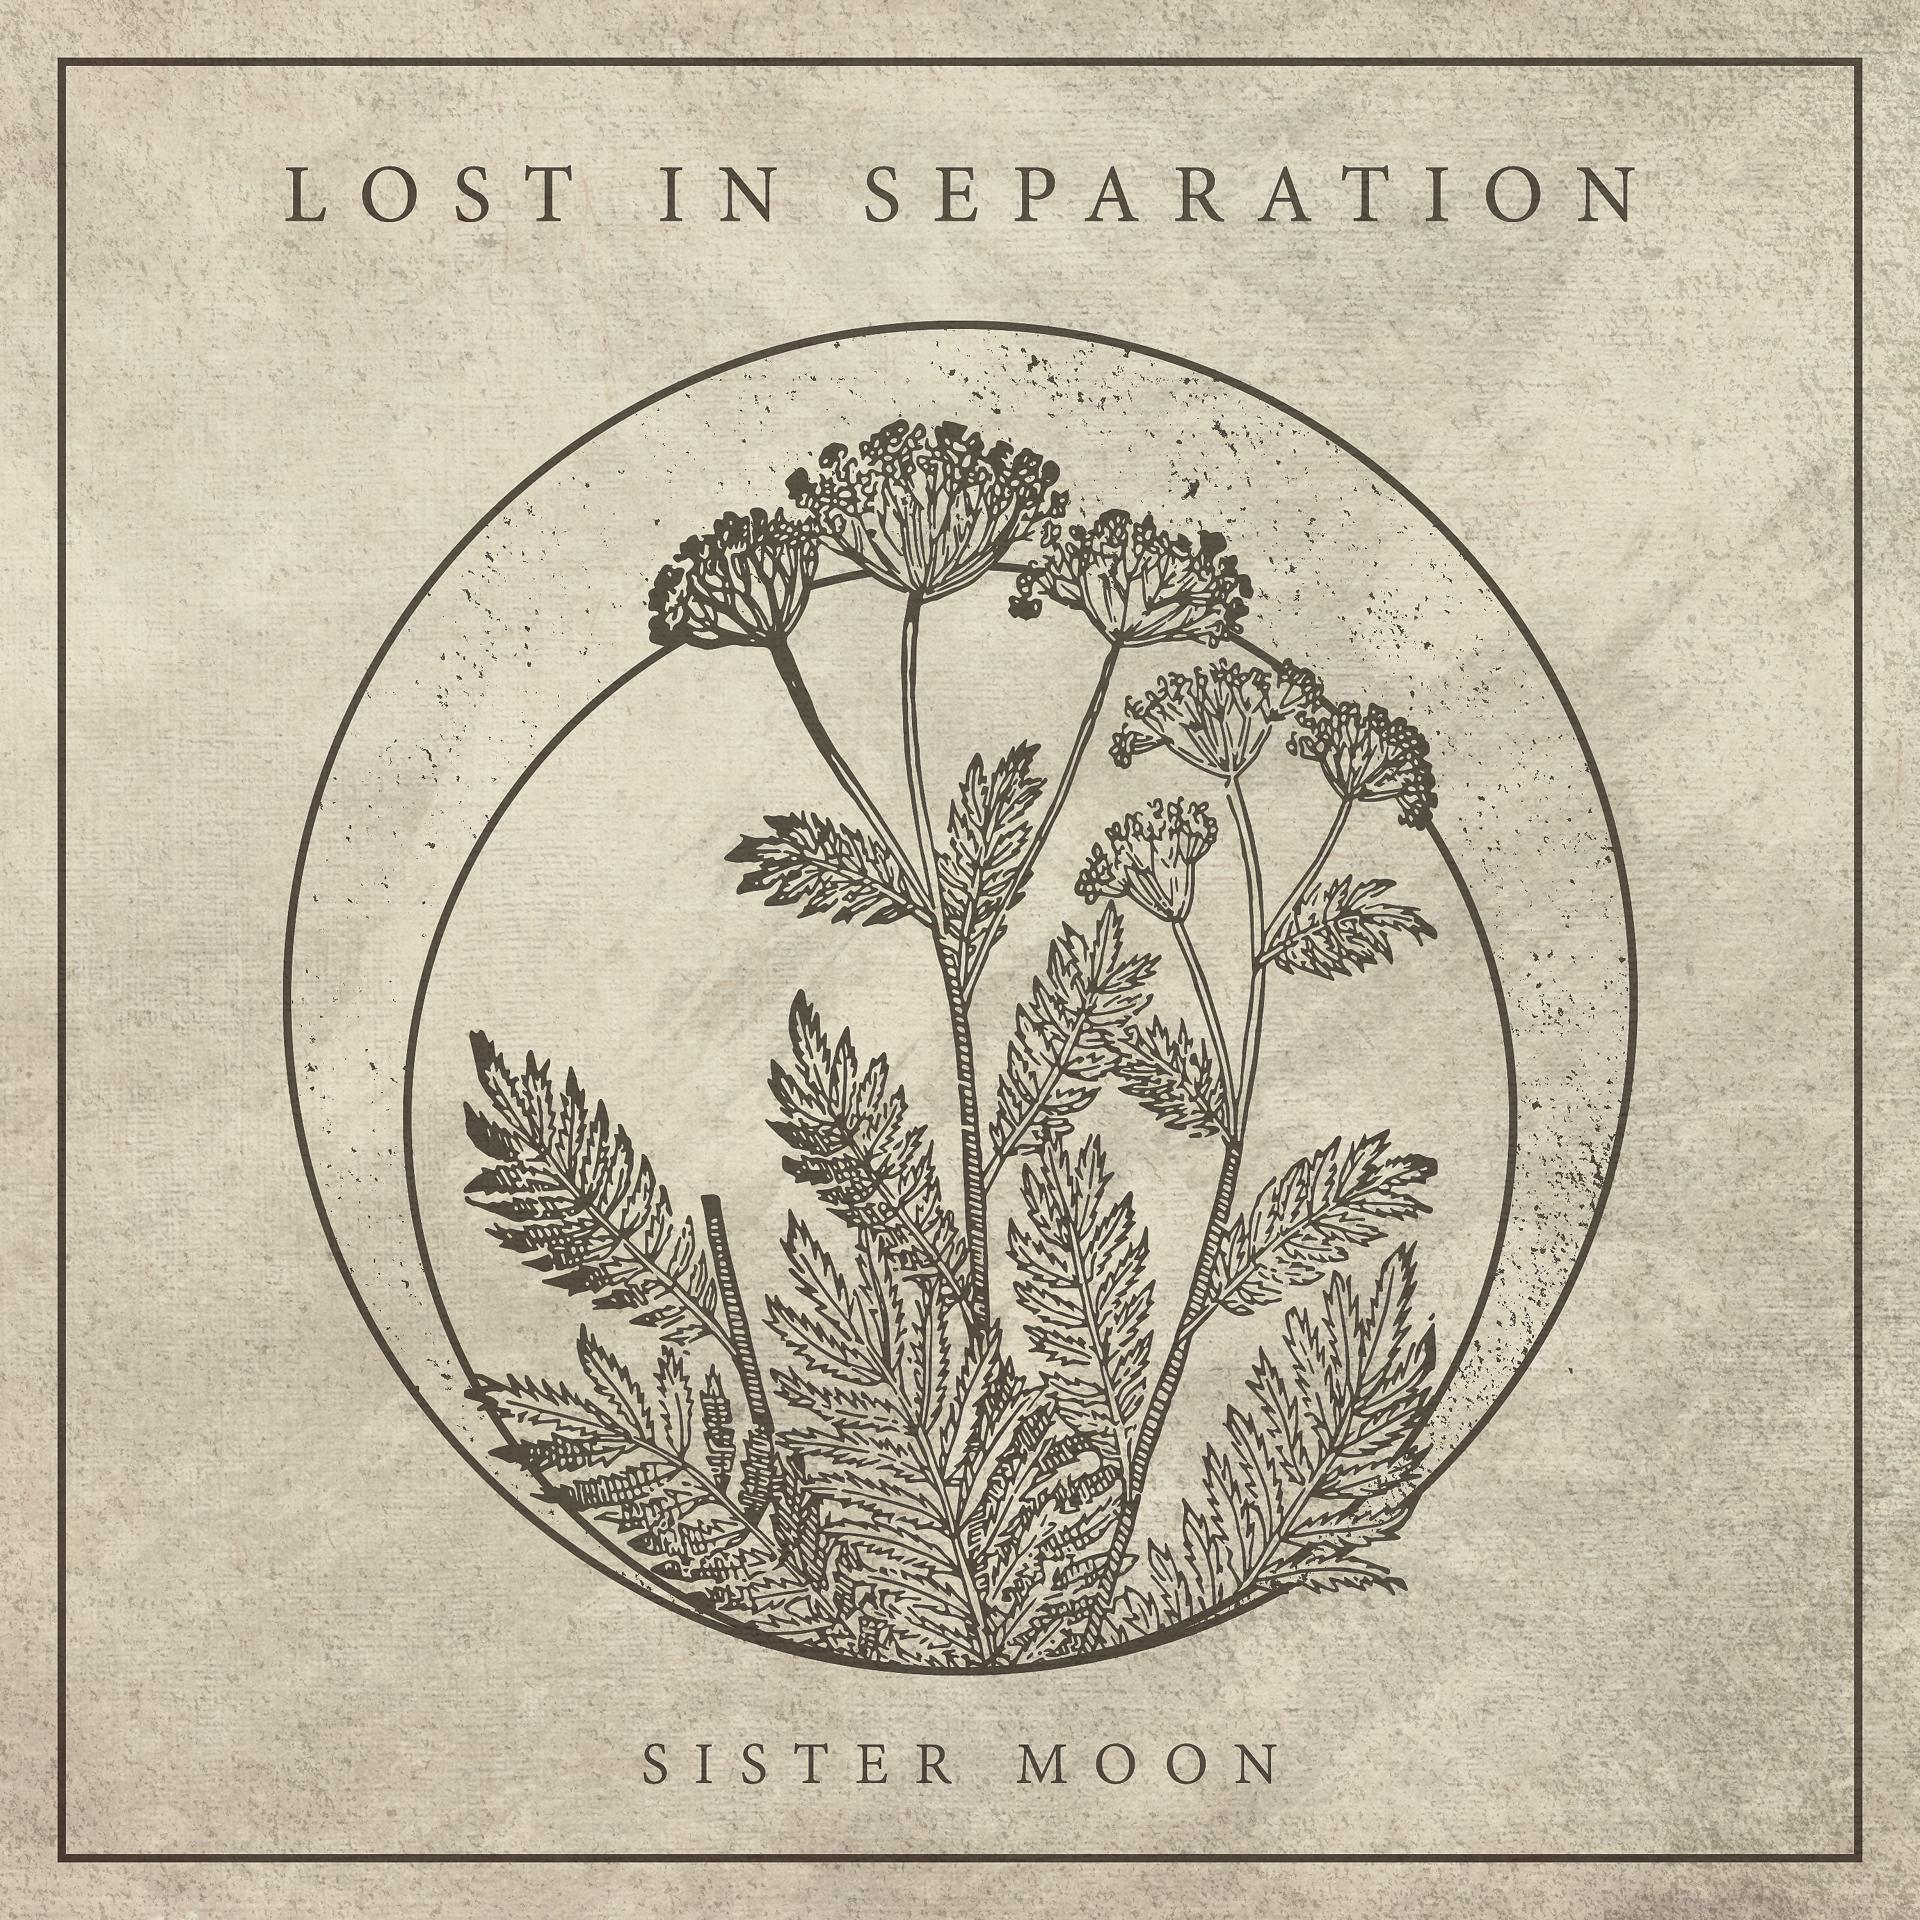 Sister moon. Lost in Separation. Lost in Separation Band. Lost in Separation Deathwish.